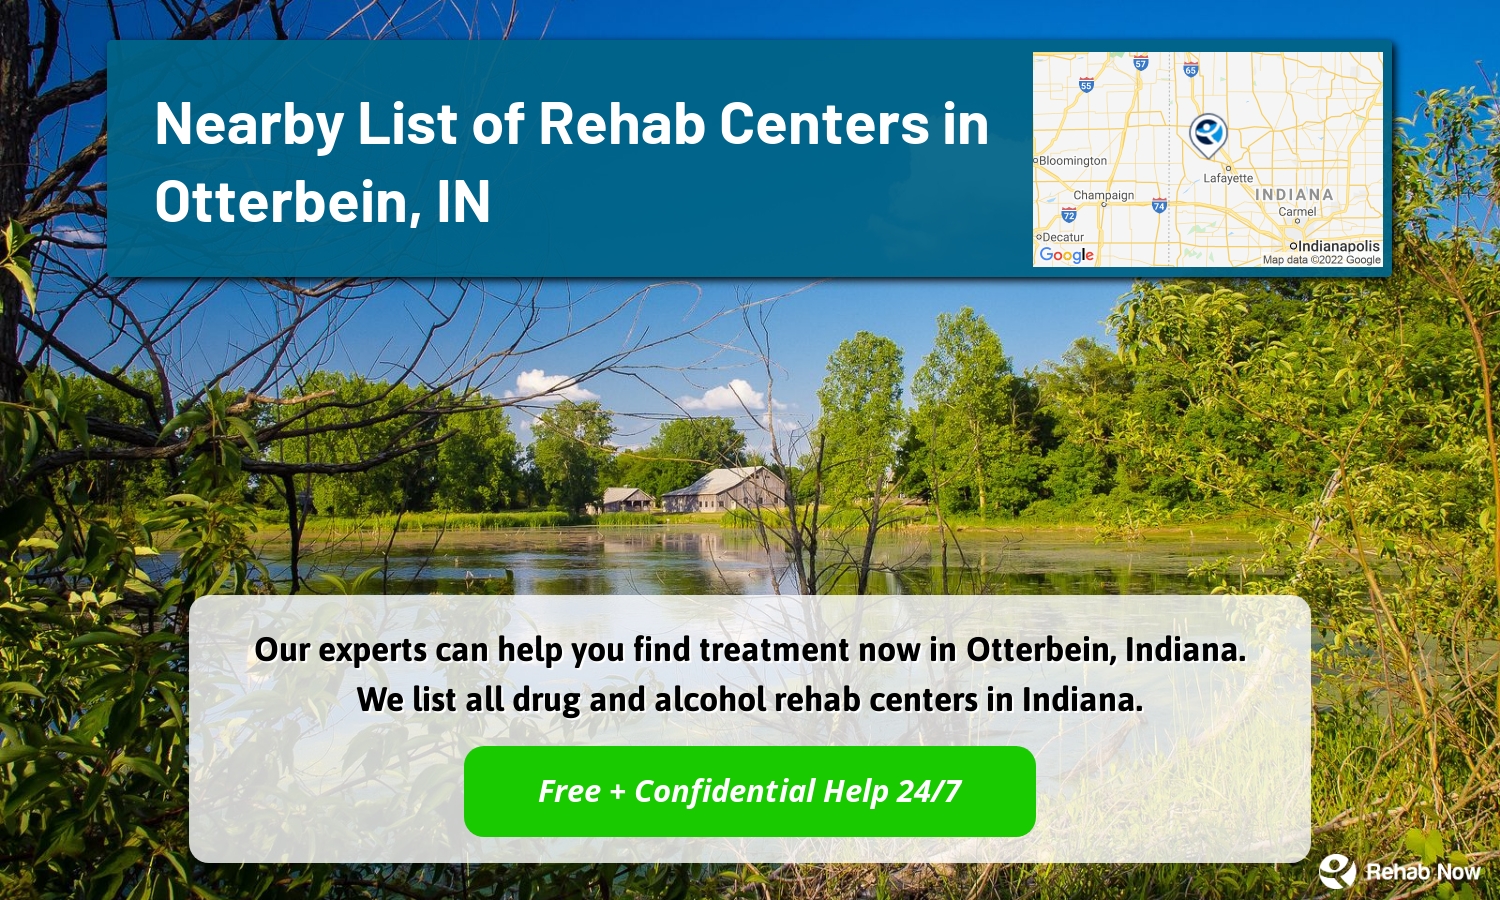 Our experts can help you find treatment now in Otterbein, Indiana. We list all drug and alcohol rehab centers in Indiana.